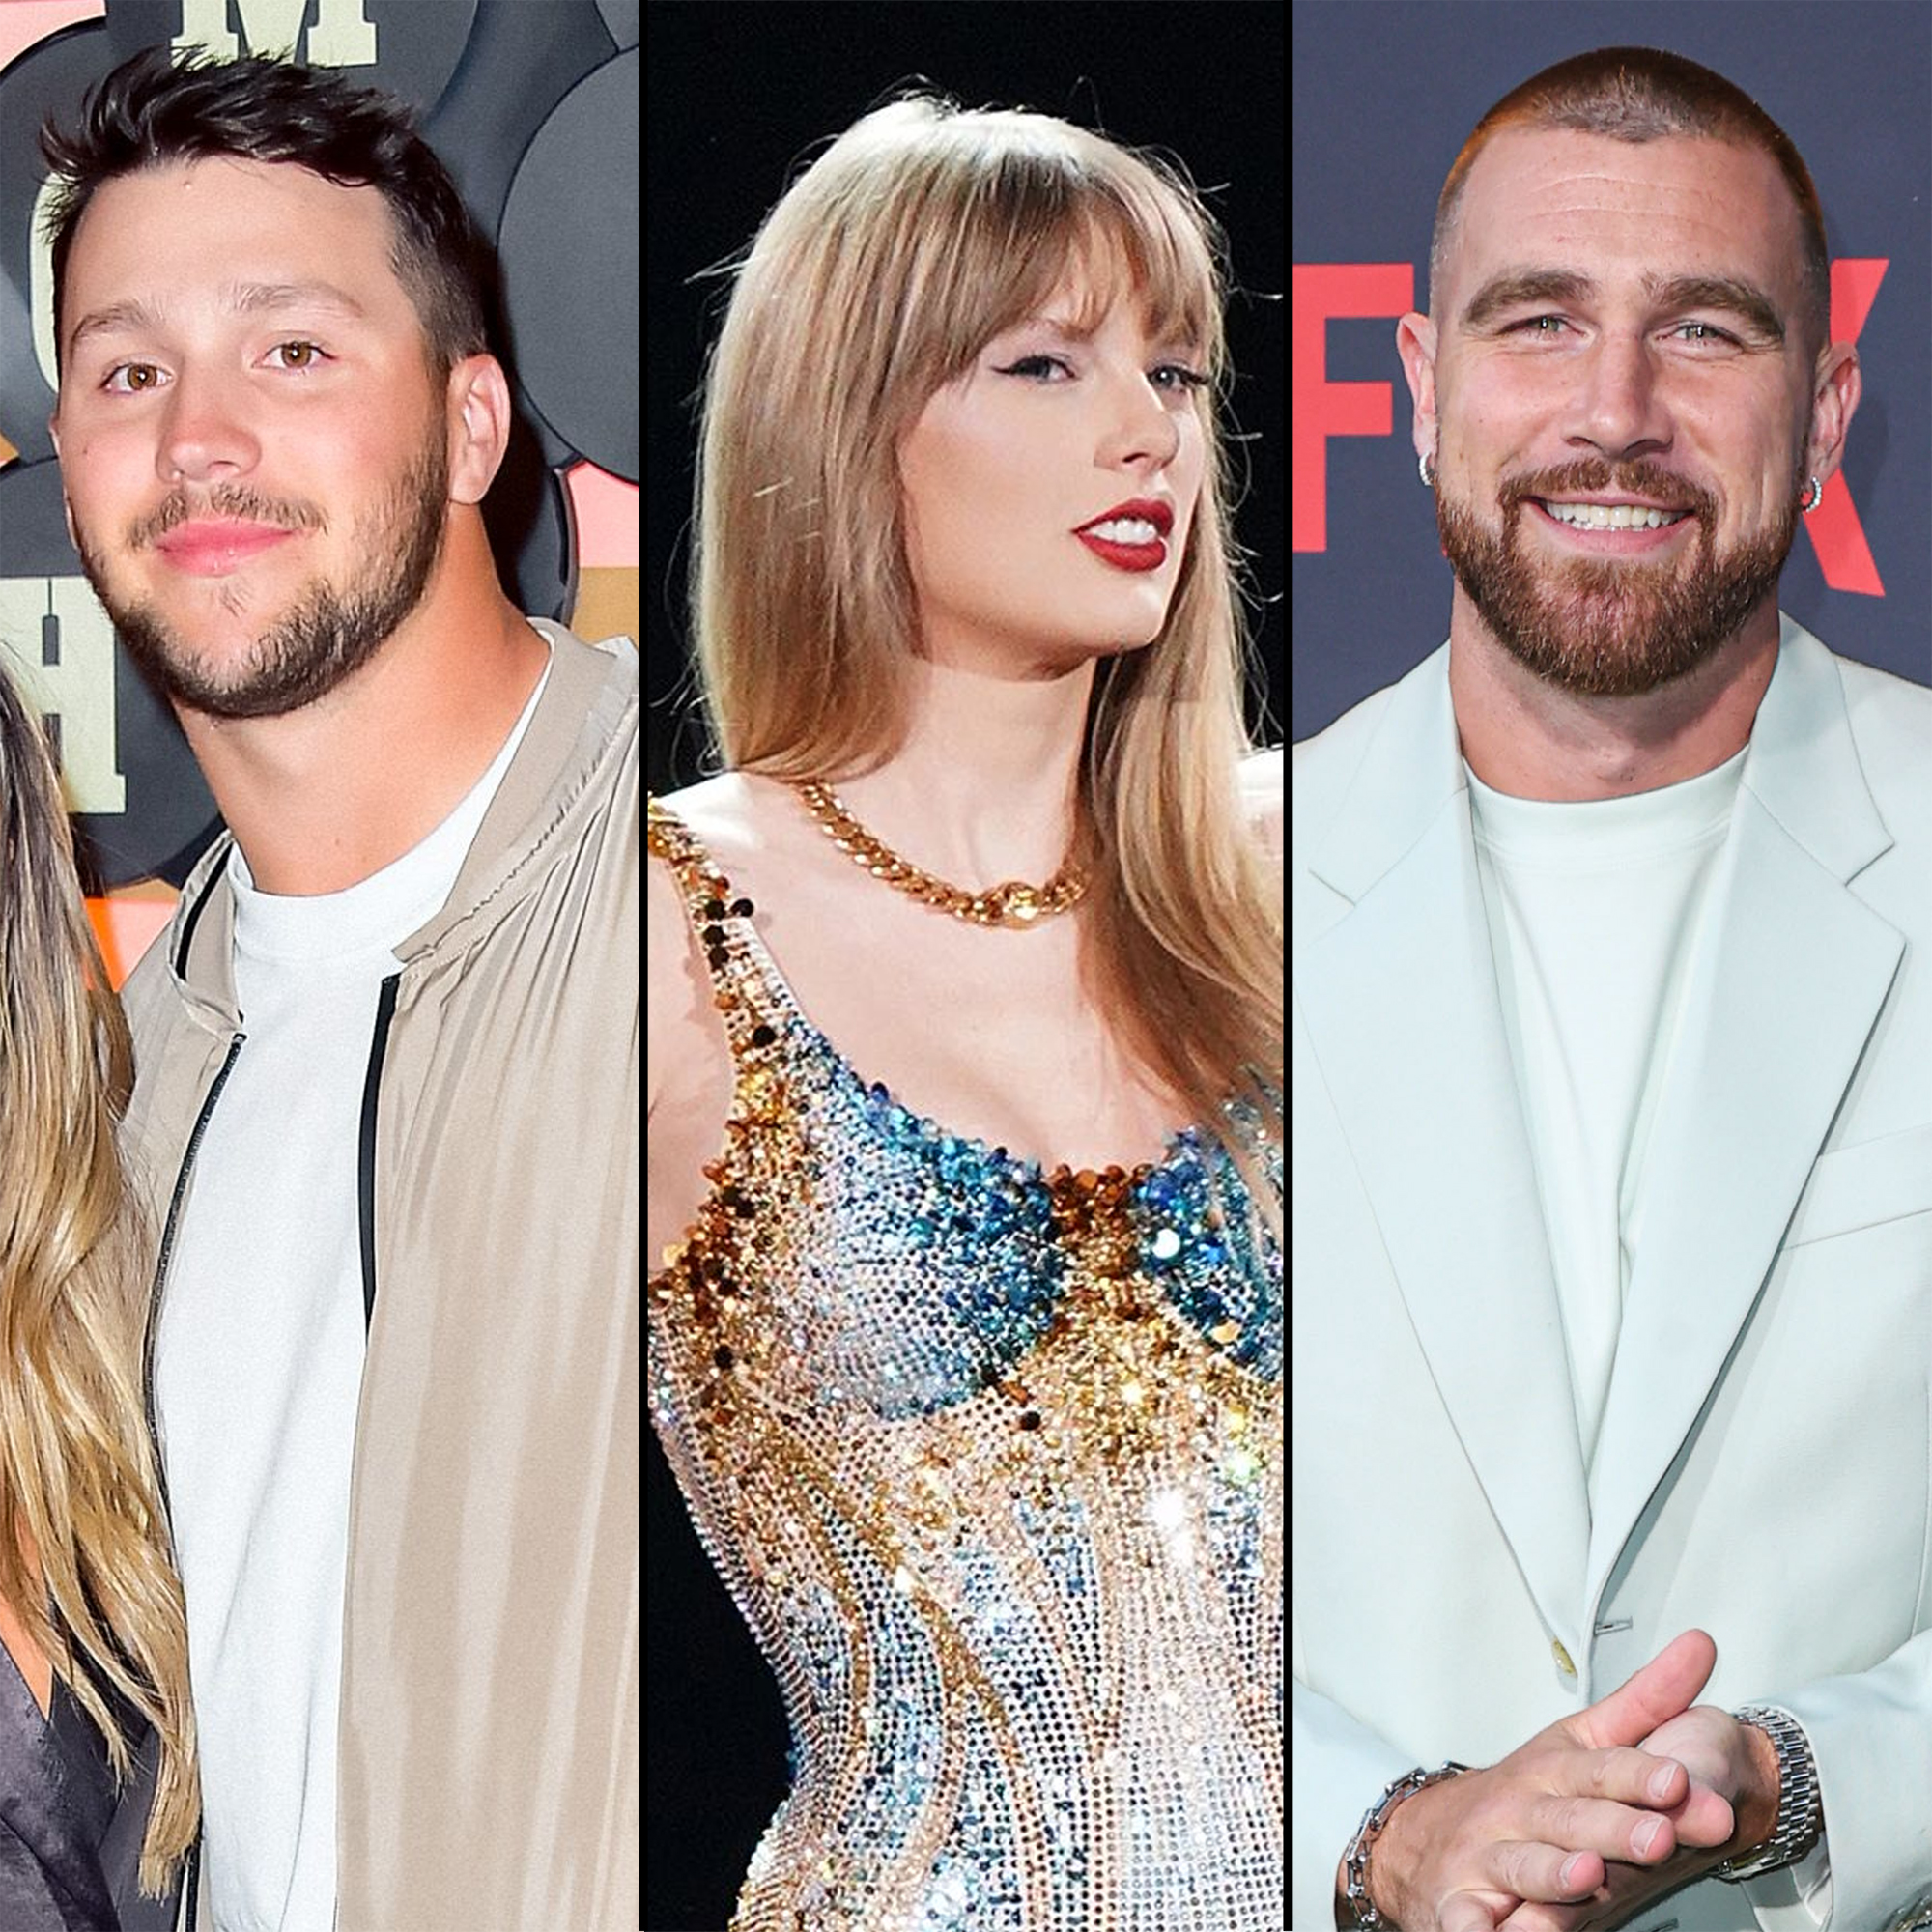 Travis Kelce's brother on NFL star's Taylor Swift dating rumors